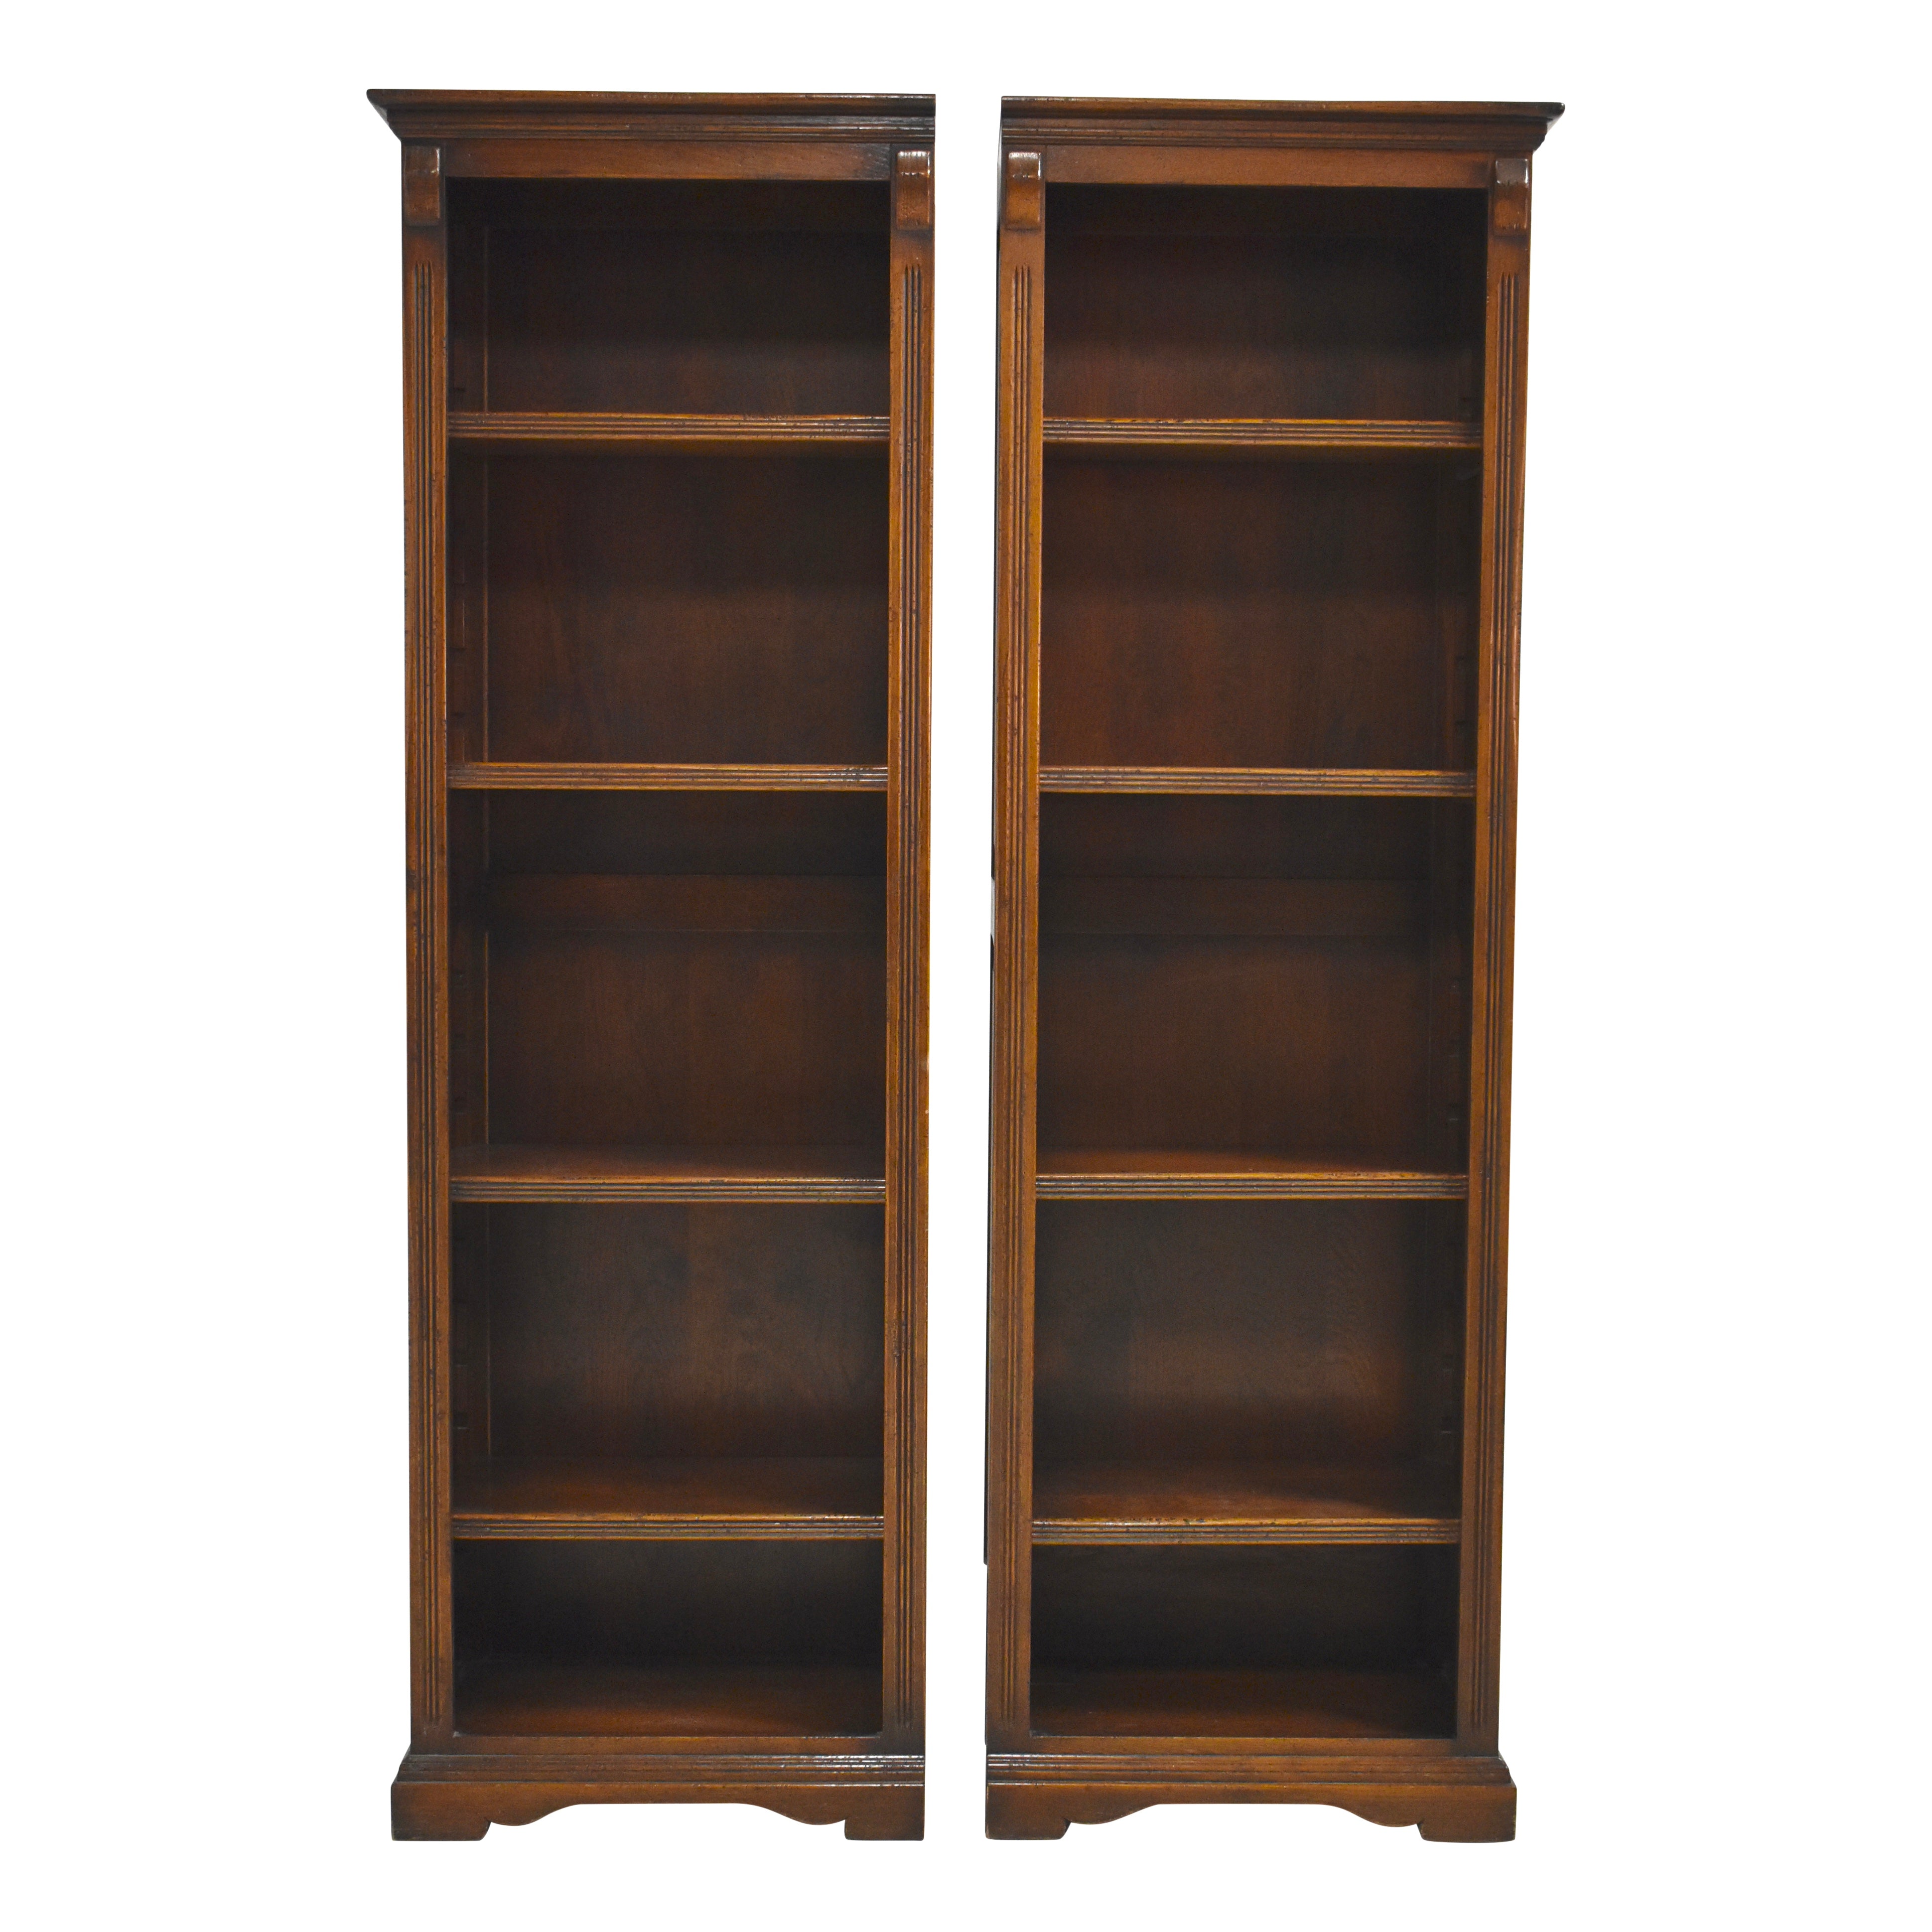 Narrow Oak Bookcases, Set of Two